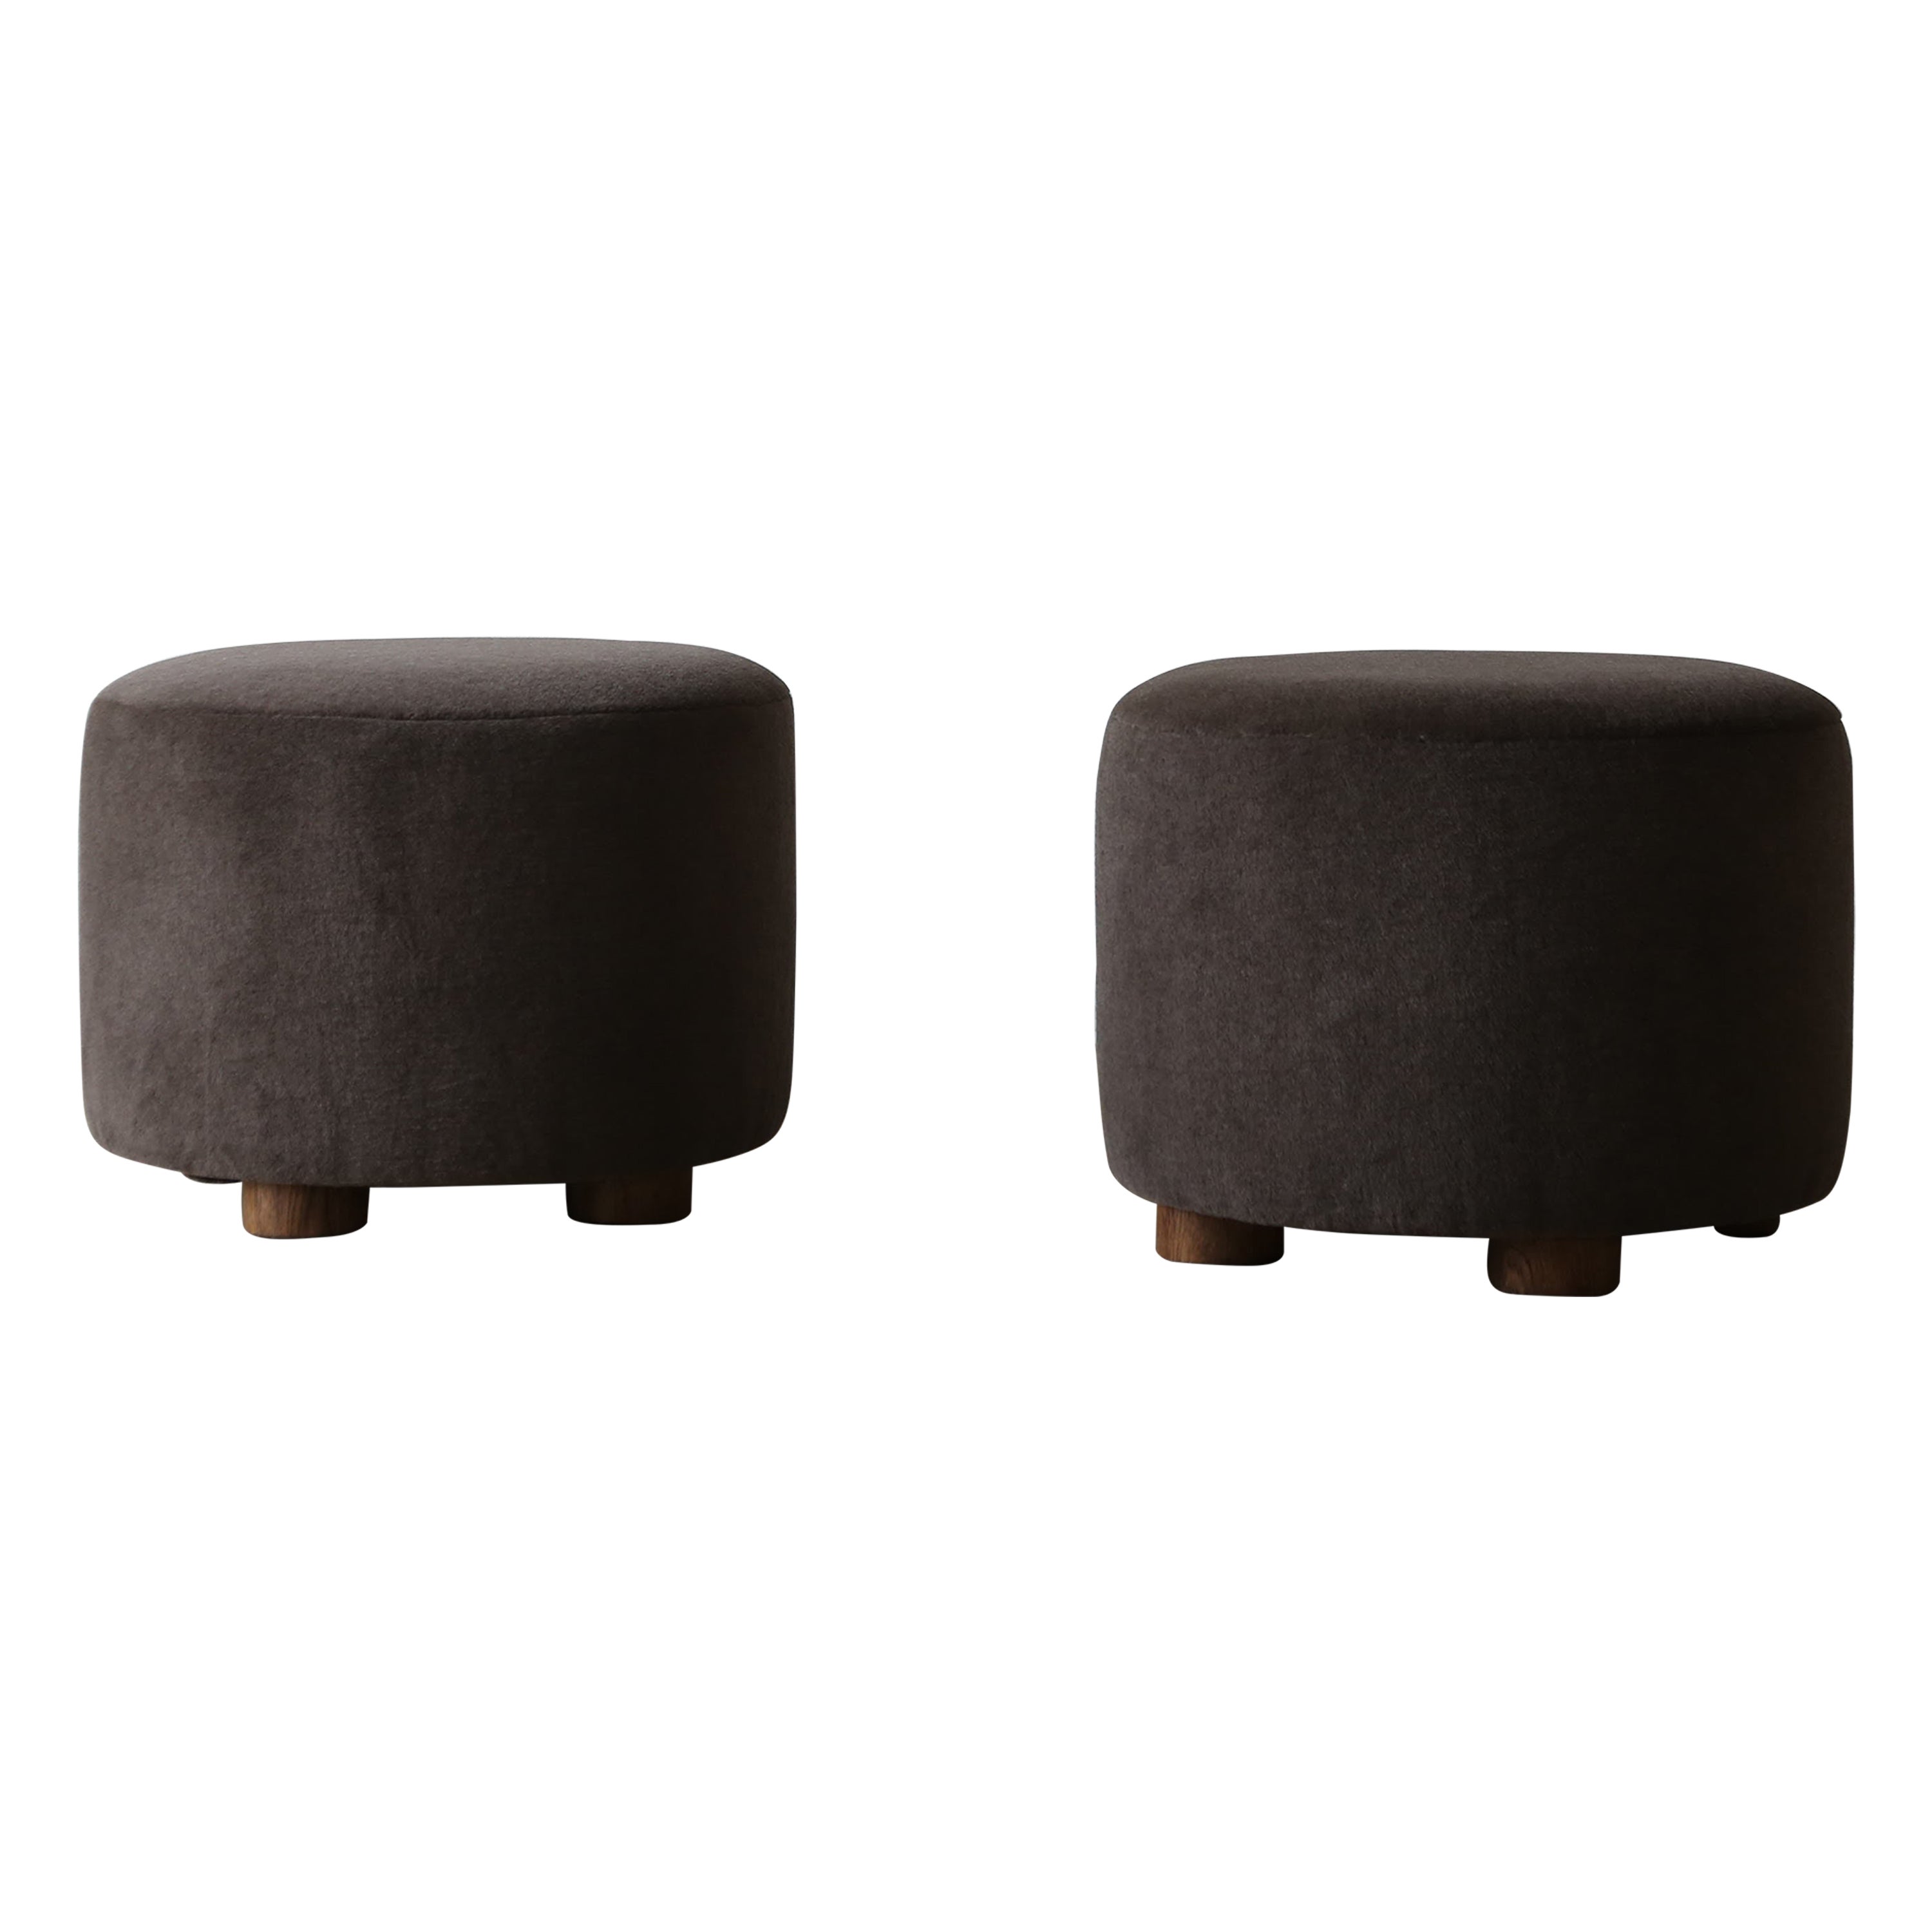 Pair of Low Round Ottomans / Footstools in Pure Dark Brown Alpaca For Sale